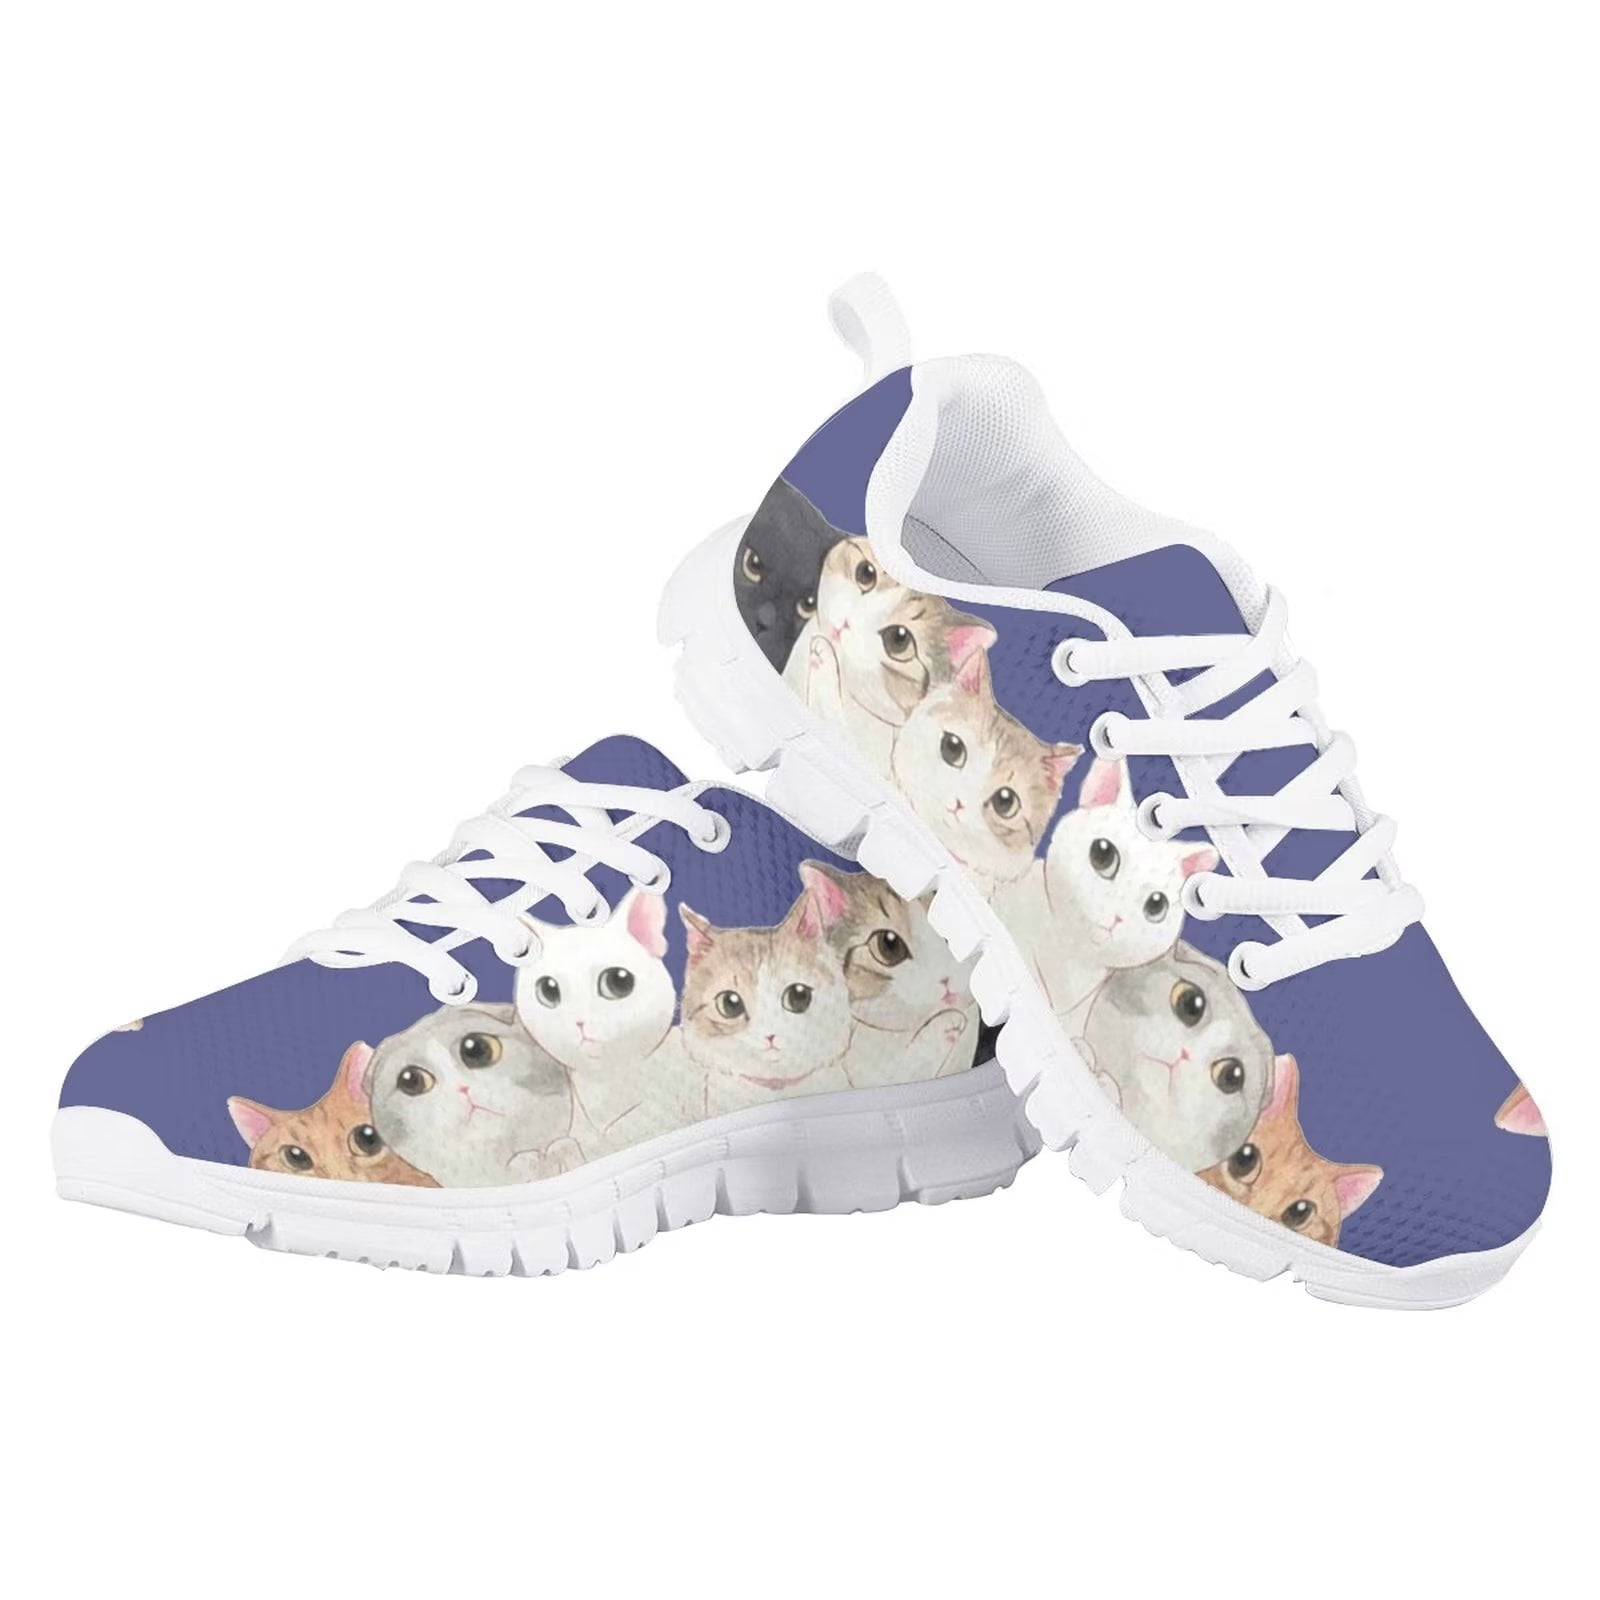 Cat Meow Sneakers – Meowhiskers